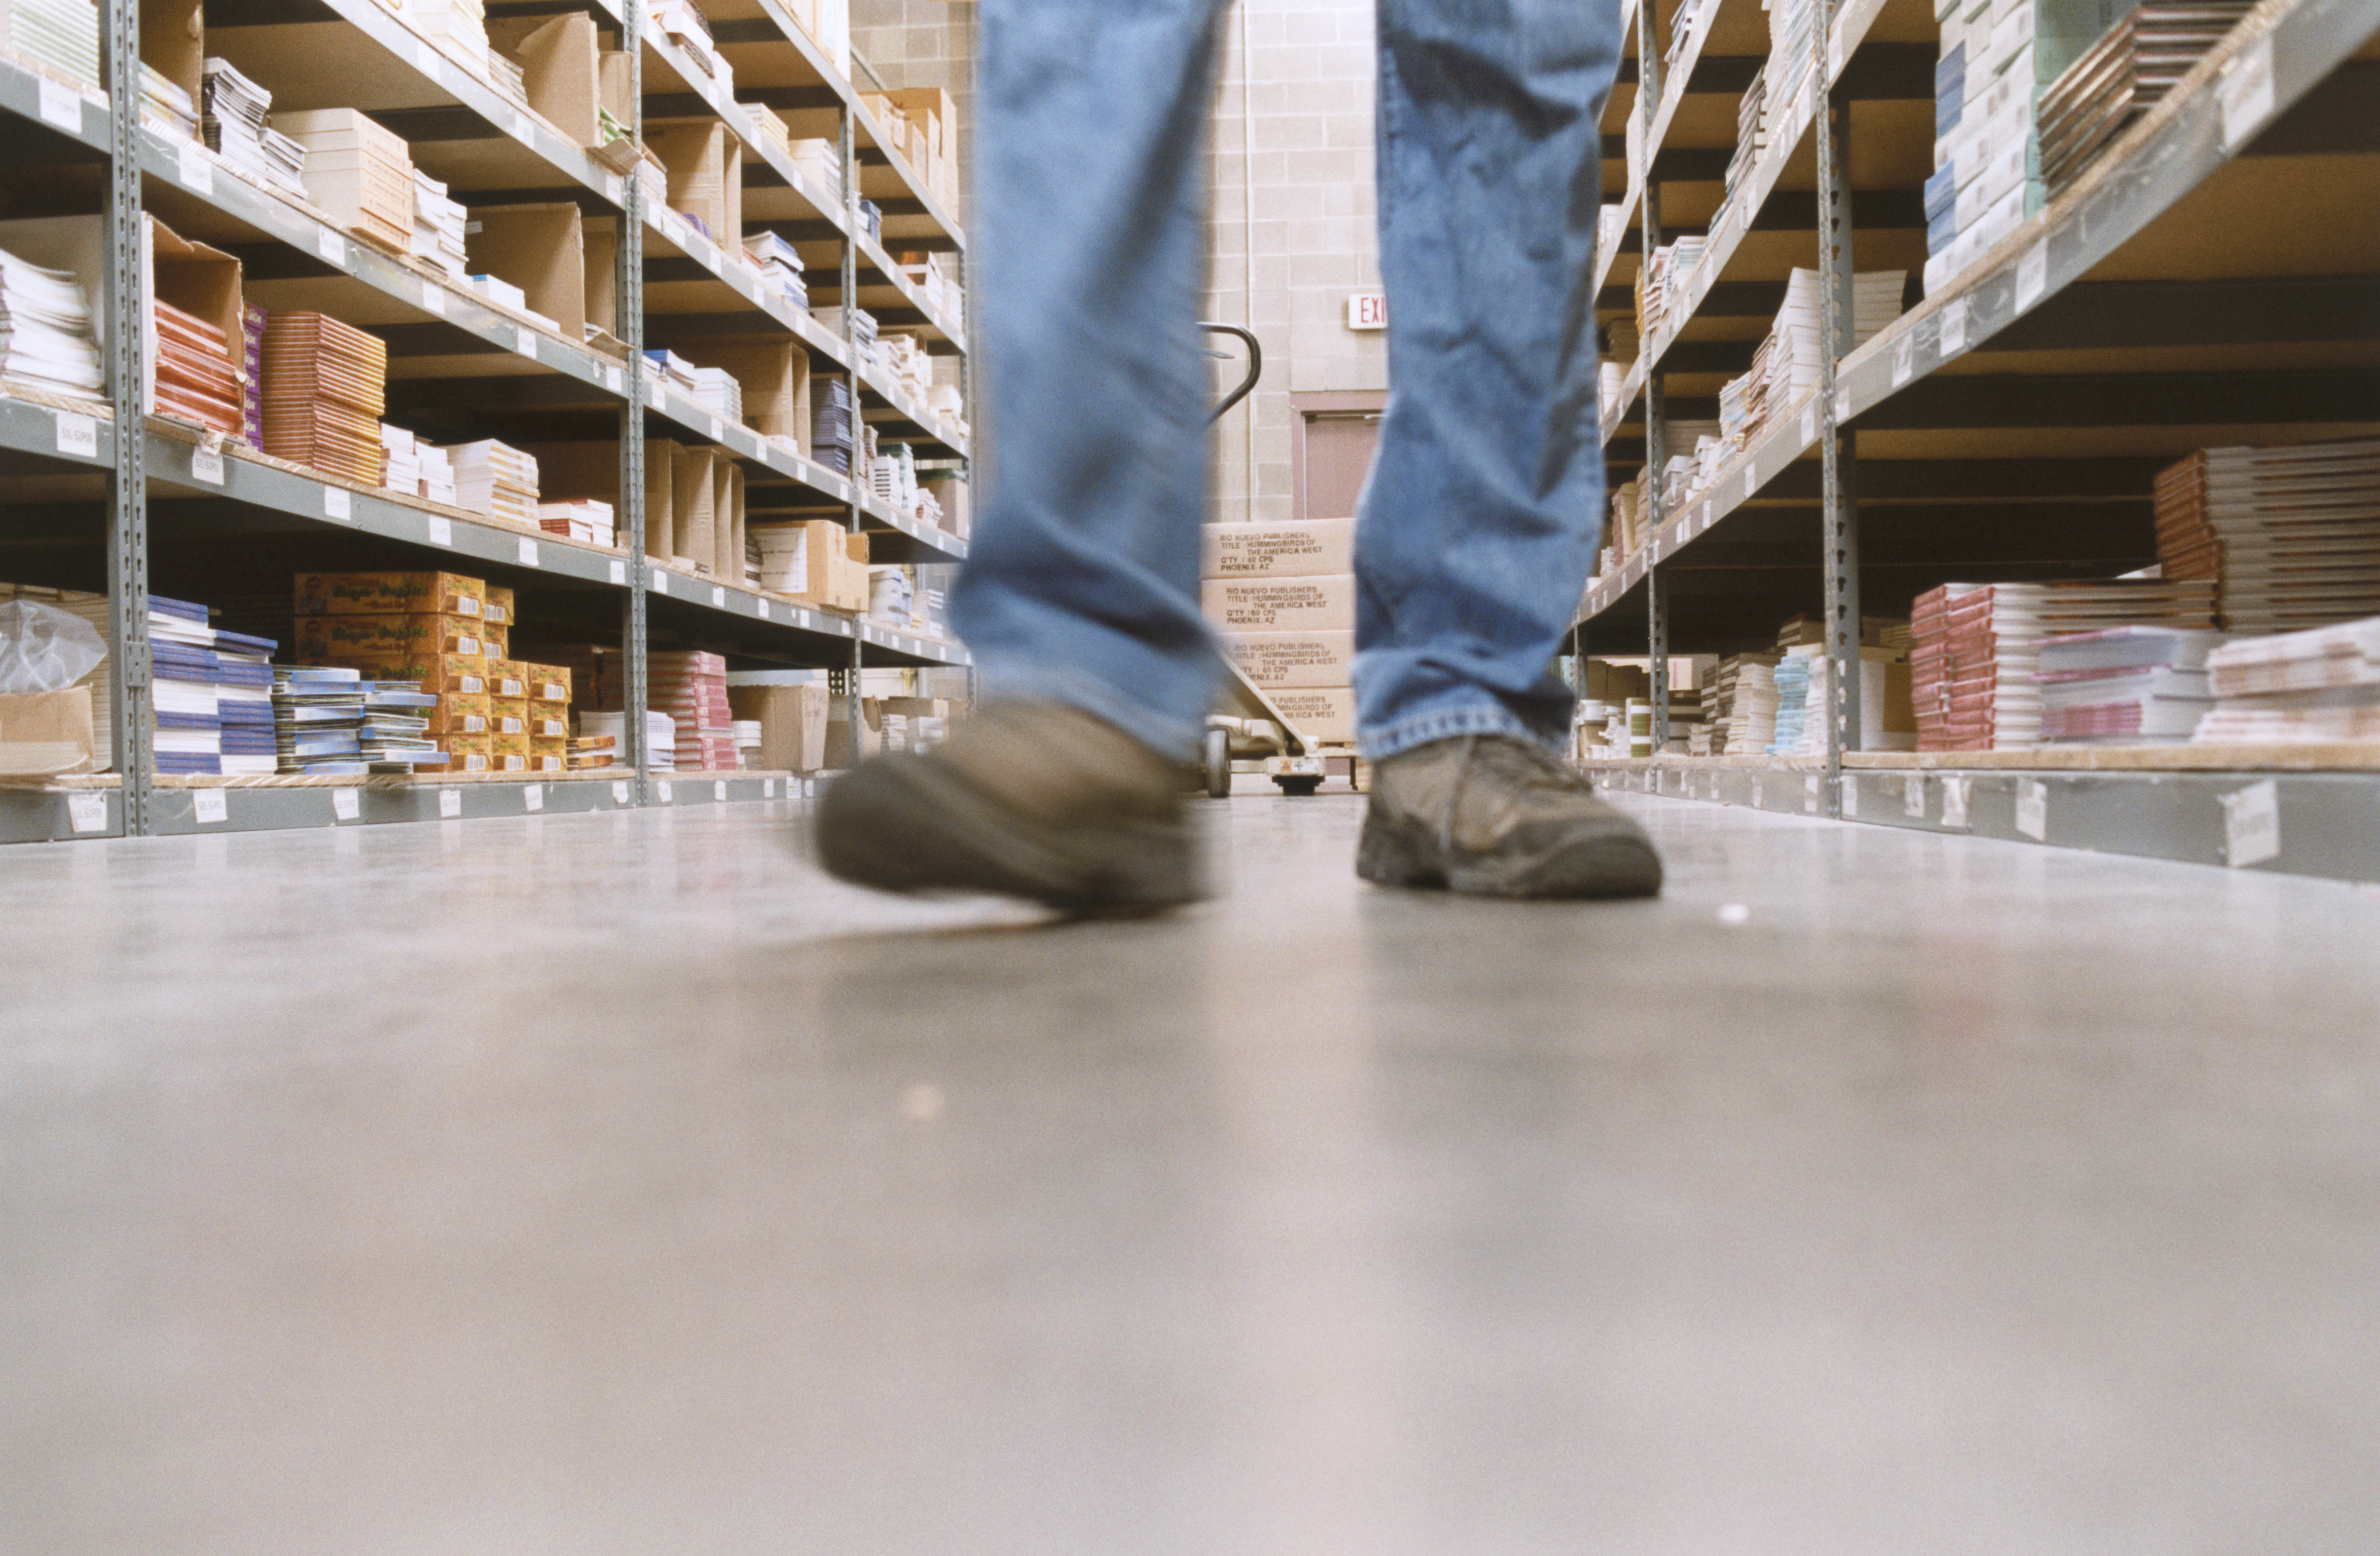 A warehouse worker walks through an aisle. Temporary workers account for about one quarter of New Jersey's growing warehouse industry.